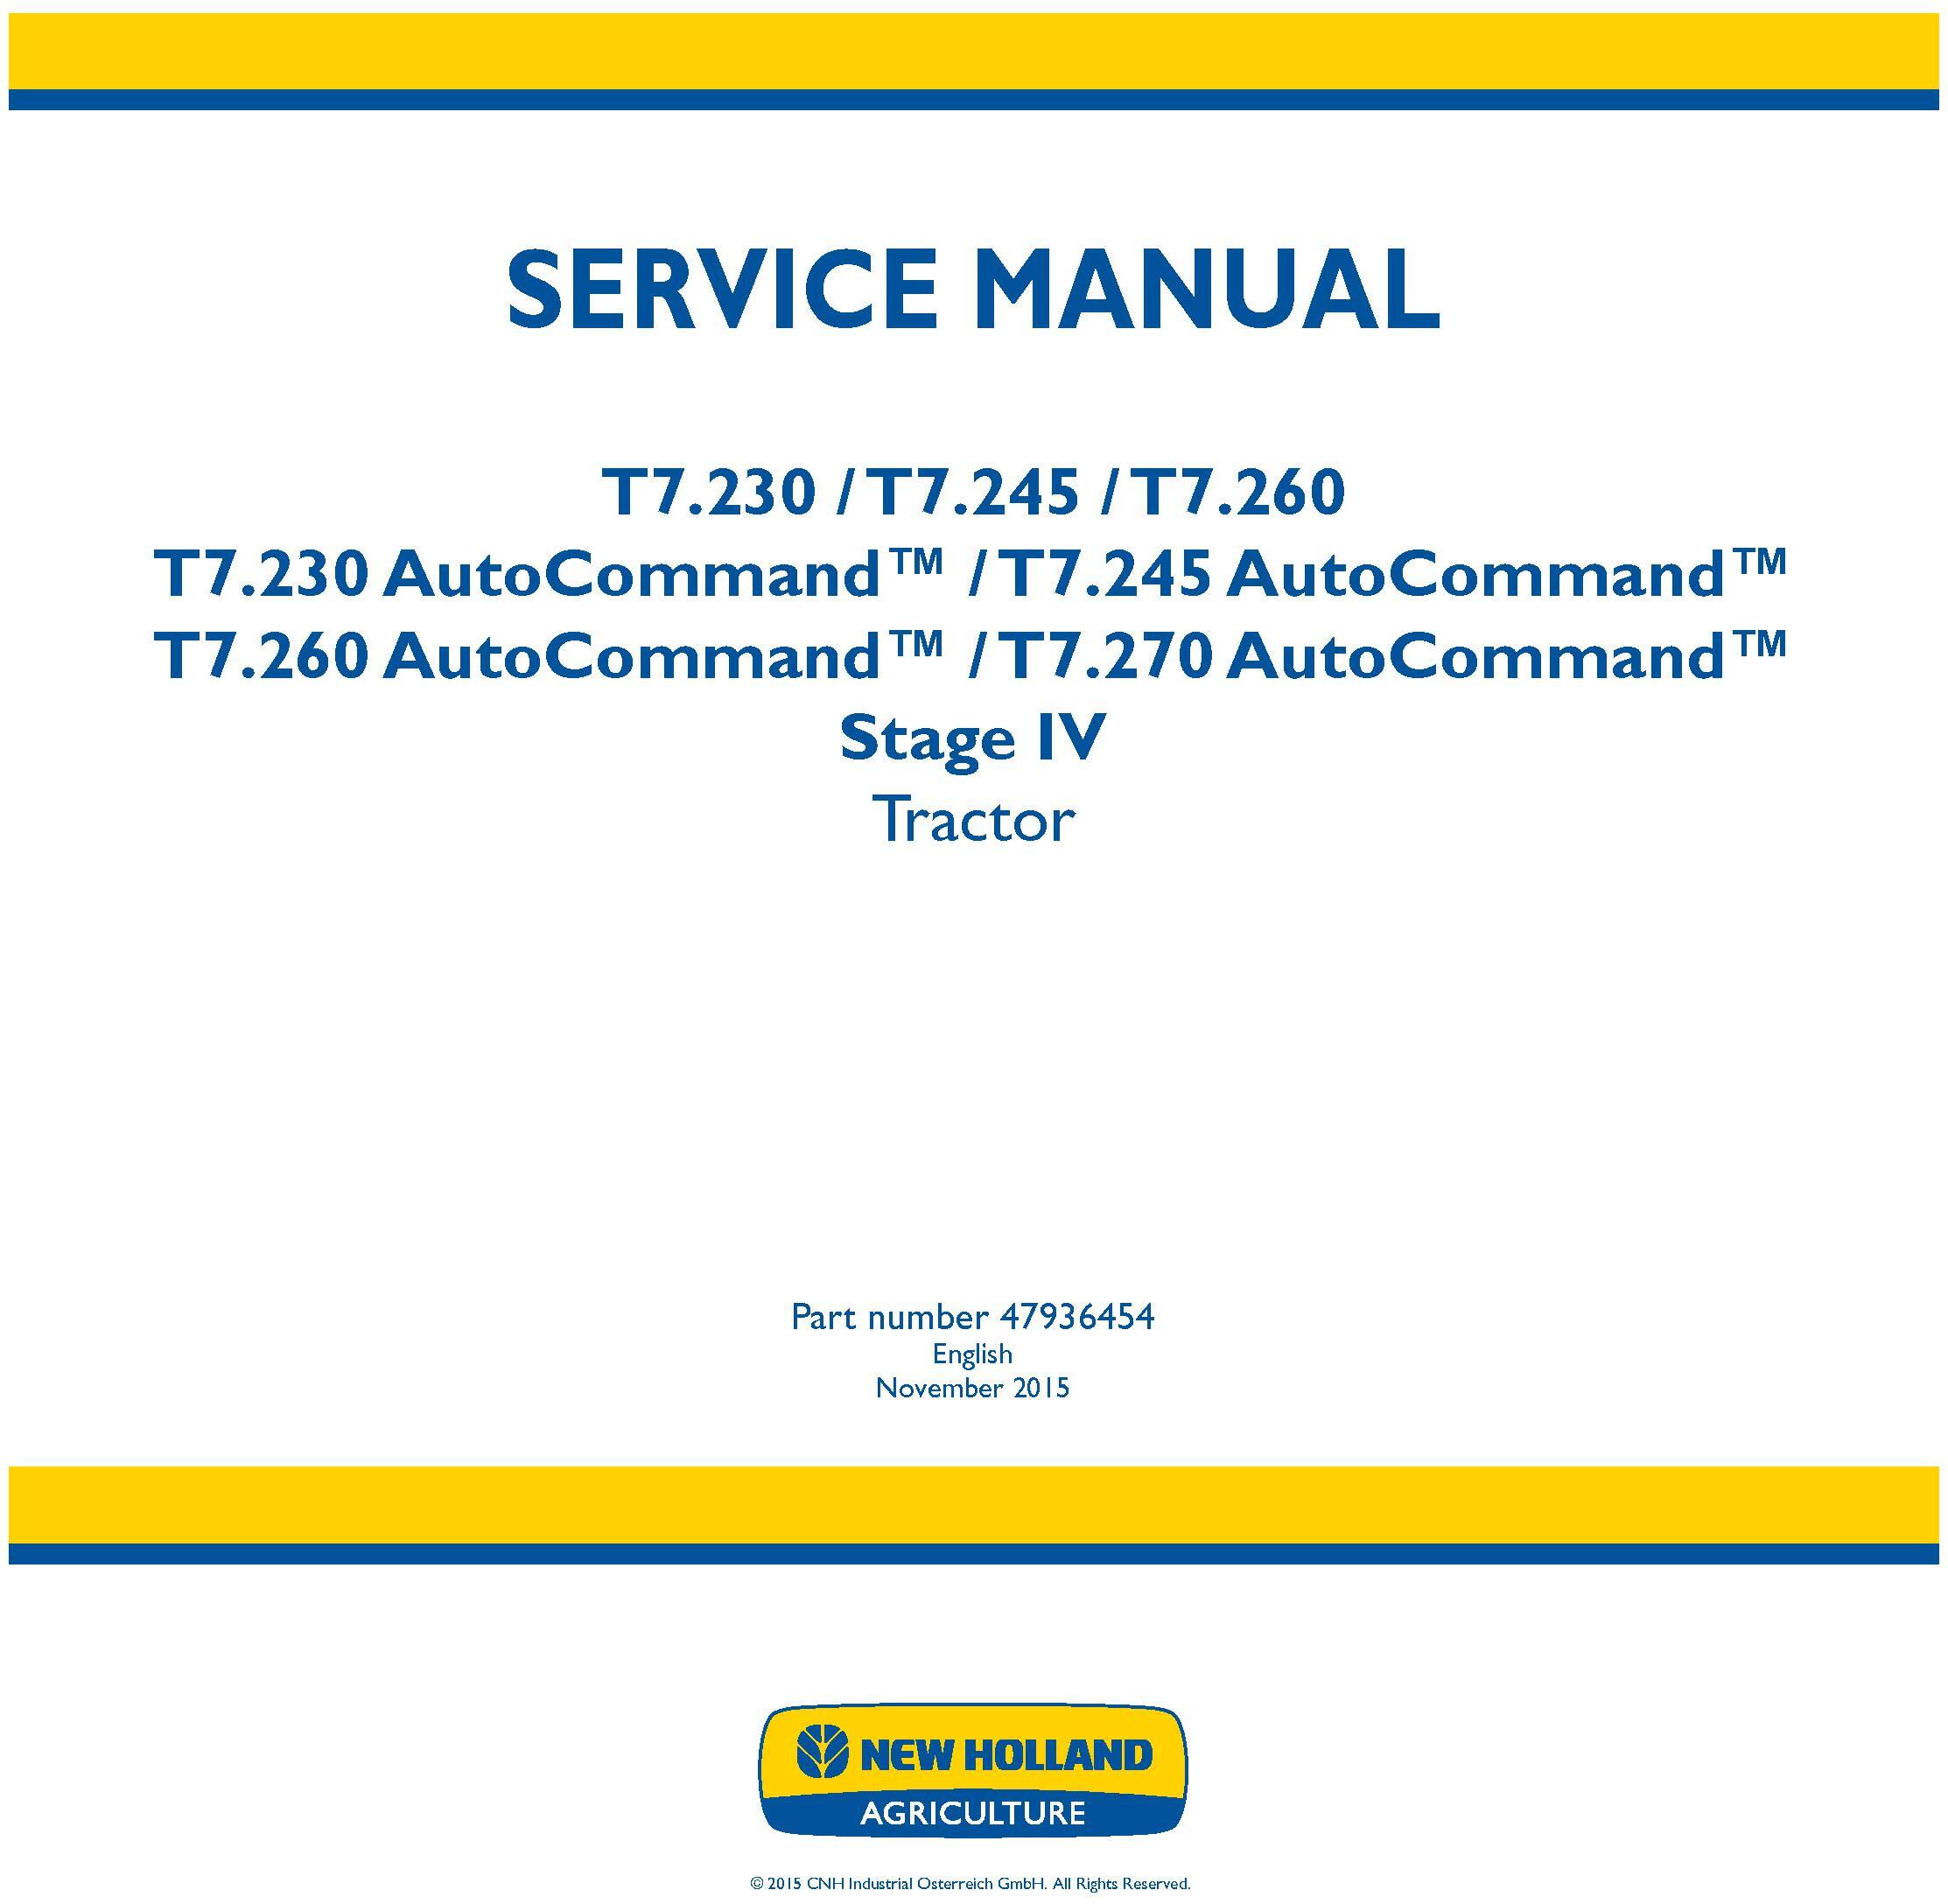 New Holland T7.230, T7.245, T7.260, T7.270 and AutoCommand Stage IV Tractor Service Manual (Europe) - 19463